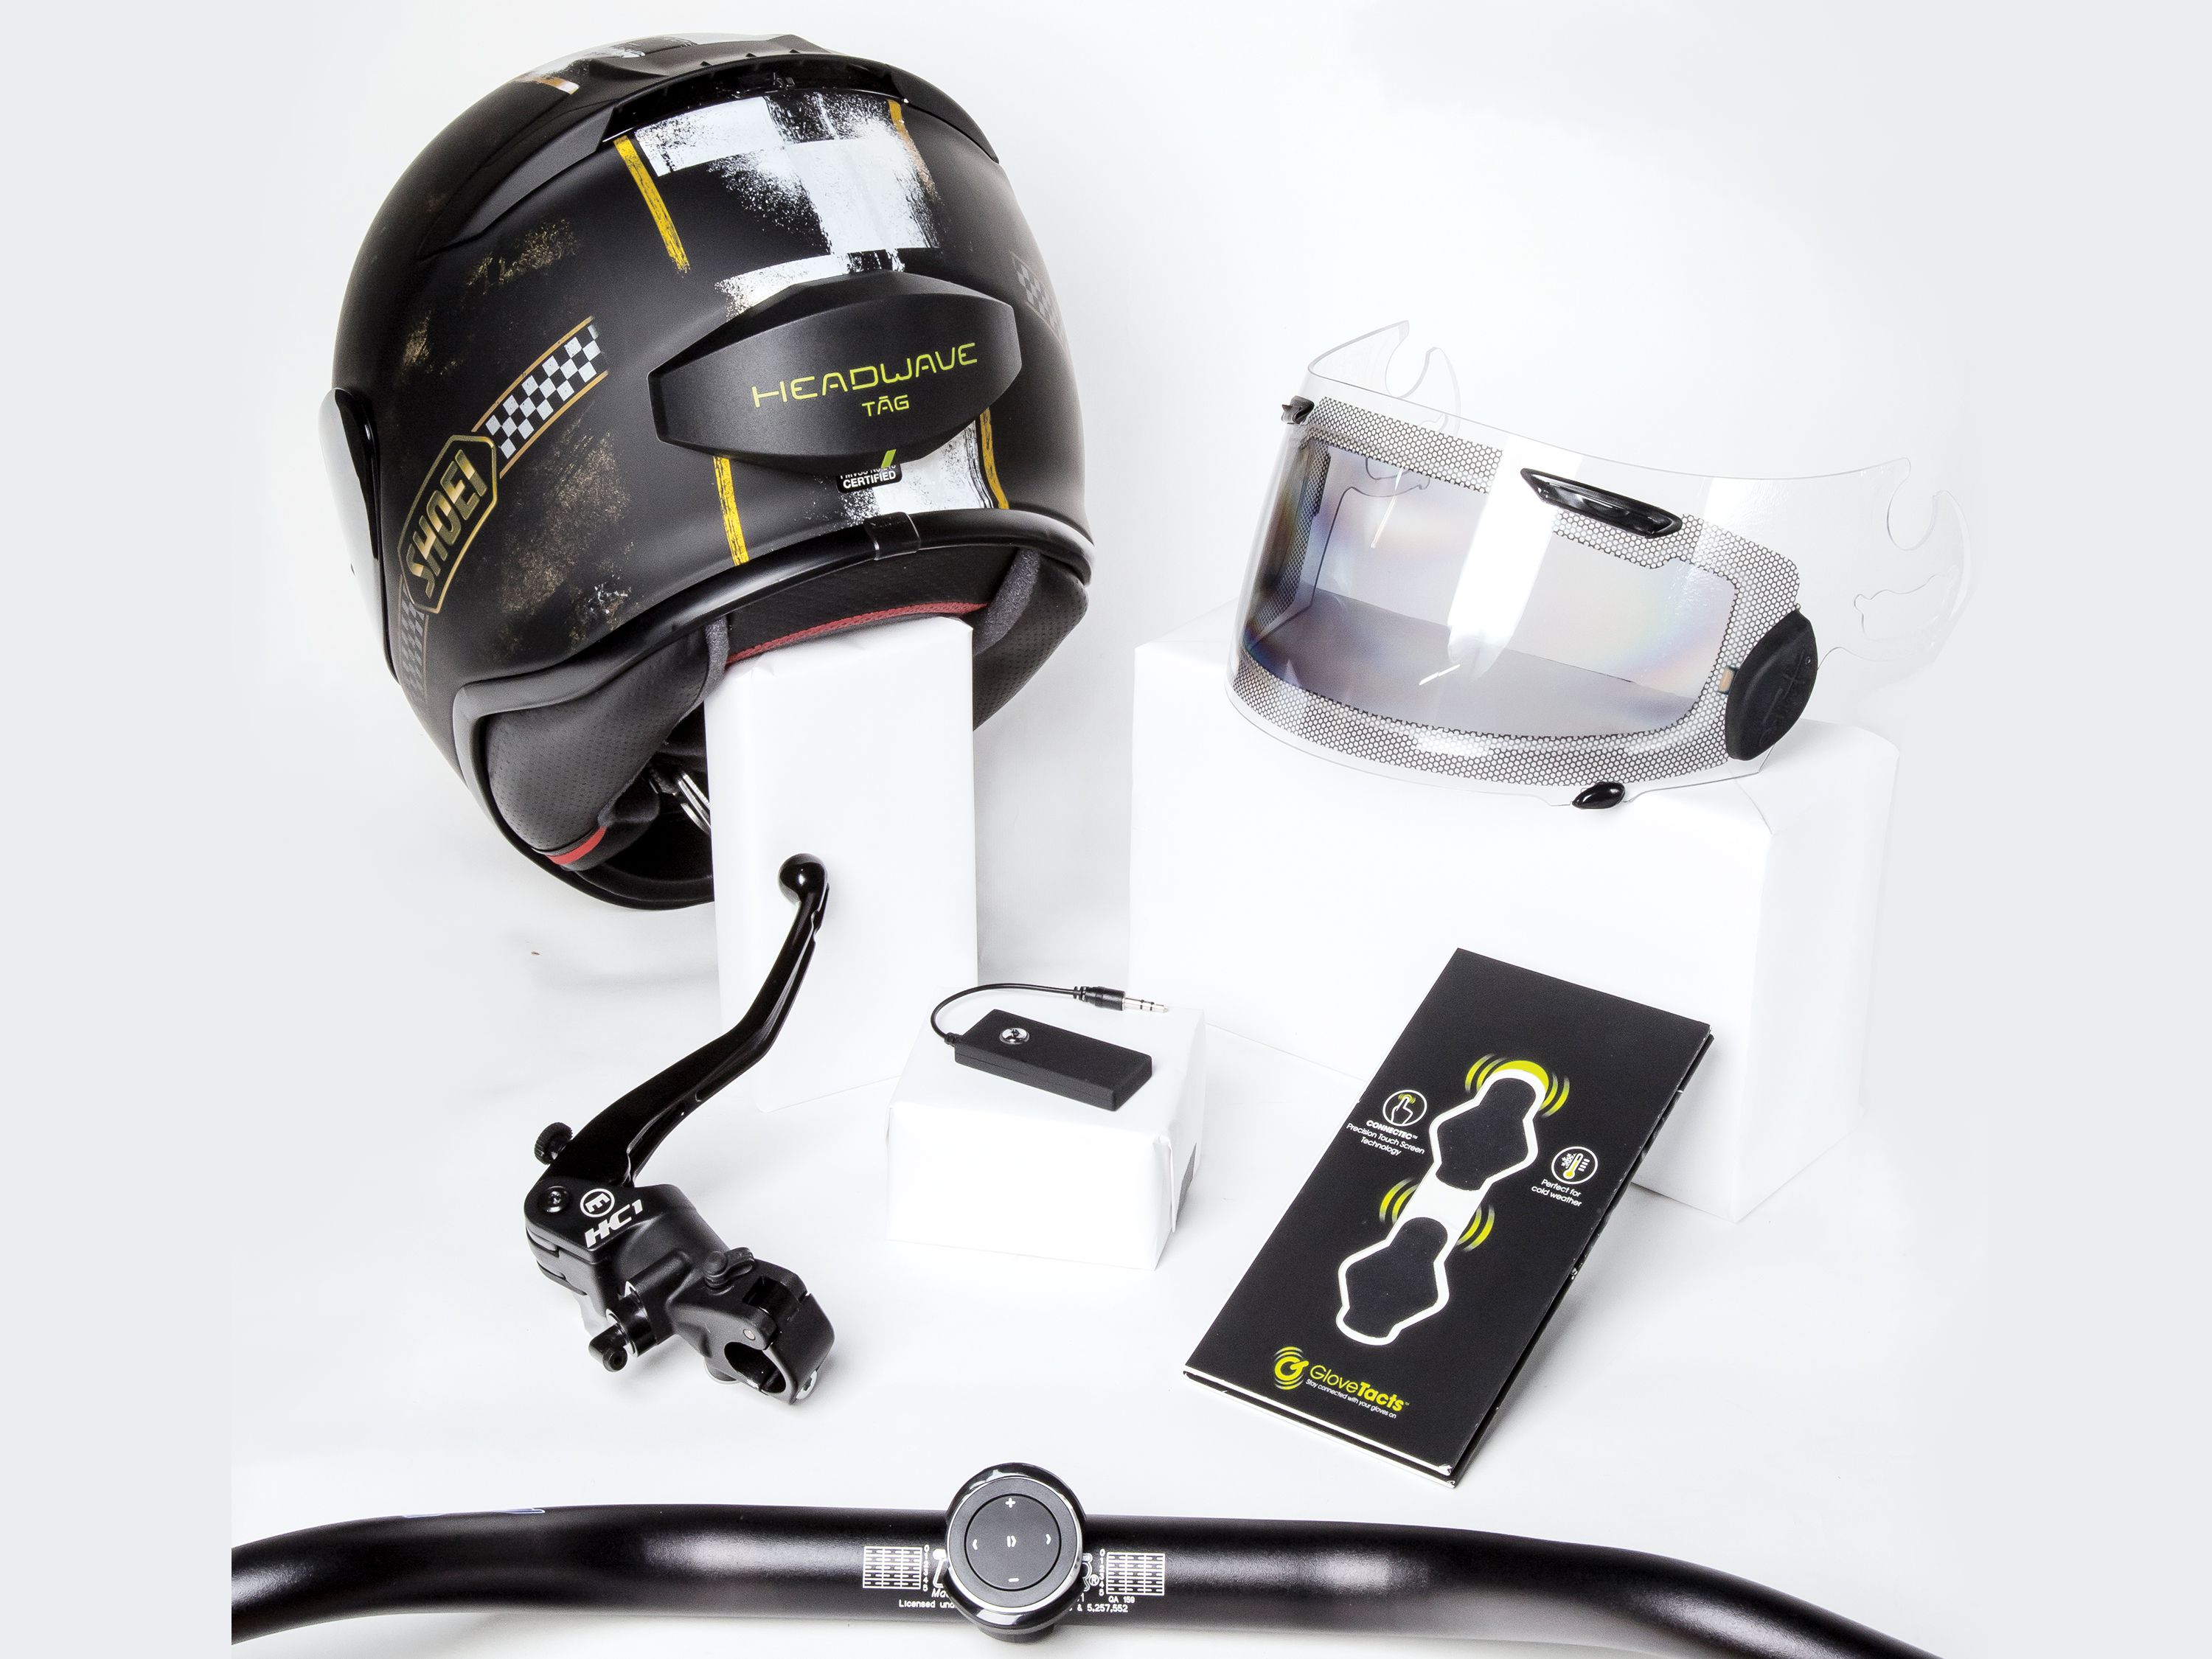 Motorcycle Accessories And Gadgets For You